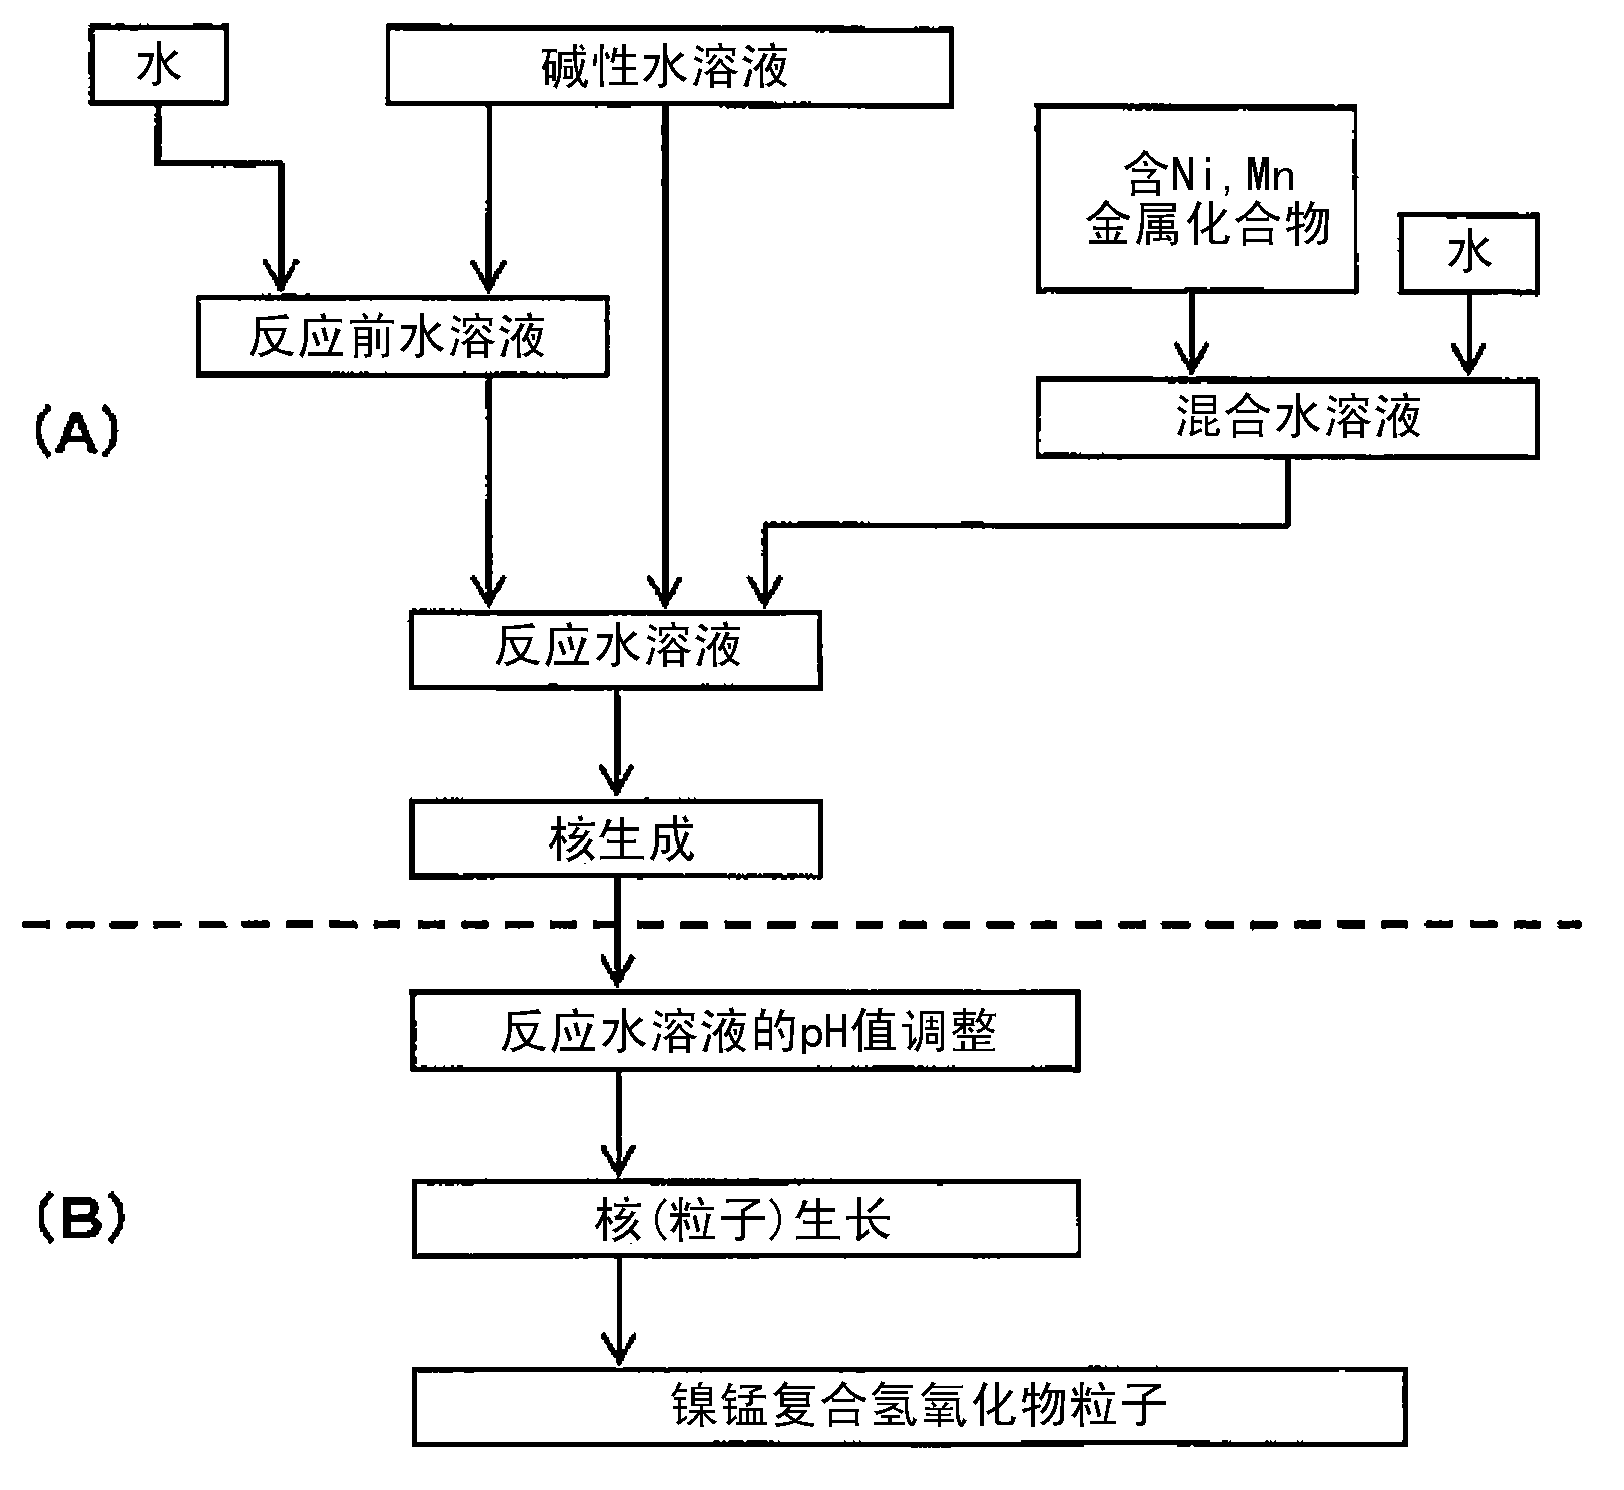 Nickel-manganese composite hydroxide particles, method for producing same, positive electrode active material for nonaqueous electrolyte secondary batteries, method for producing said positive electrode active material, and nonaqueous electrolyte secondary battery